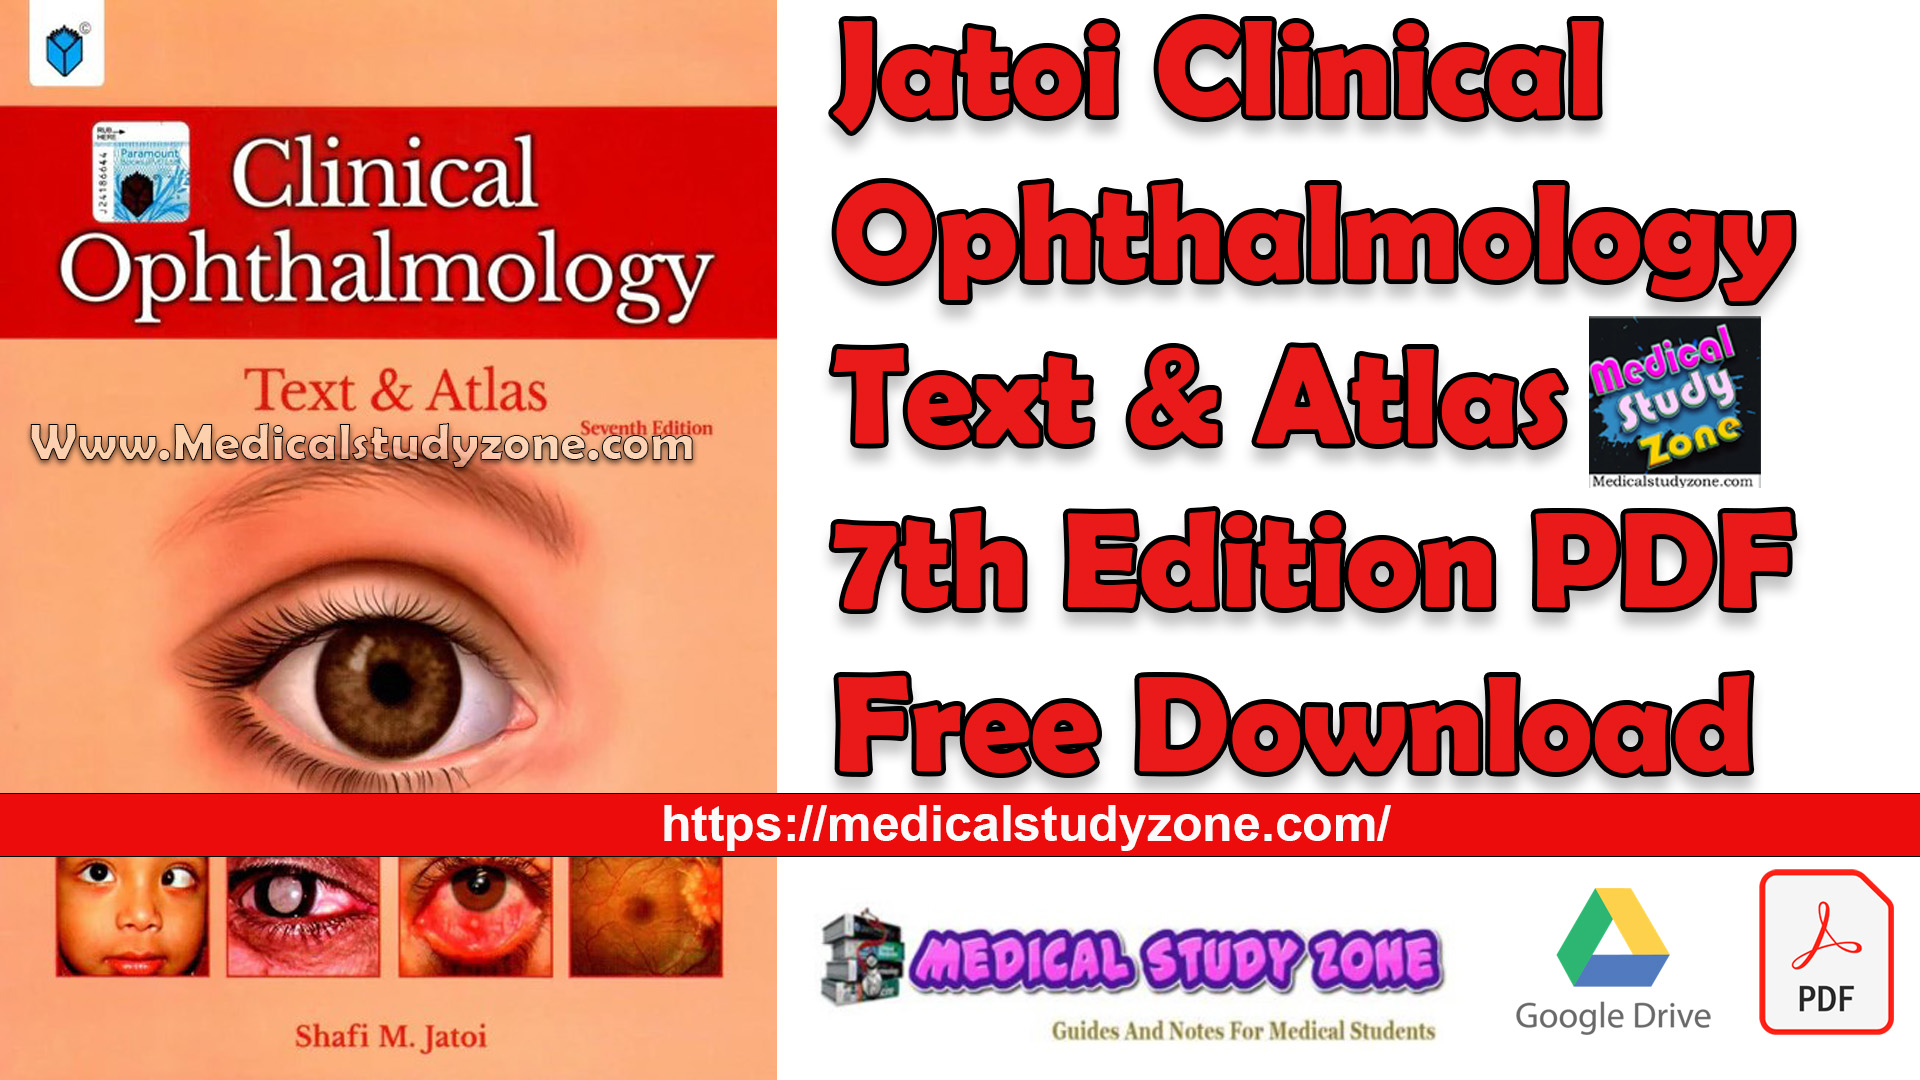 Jatoi Clinical Ophthalmology Text & Atlas 7th Edition PDF Free Download